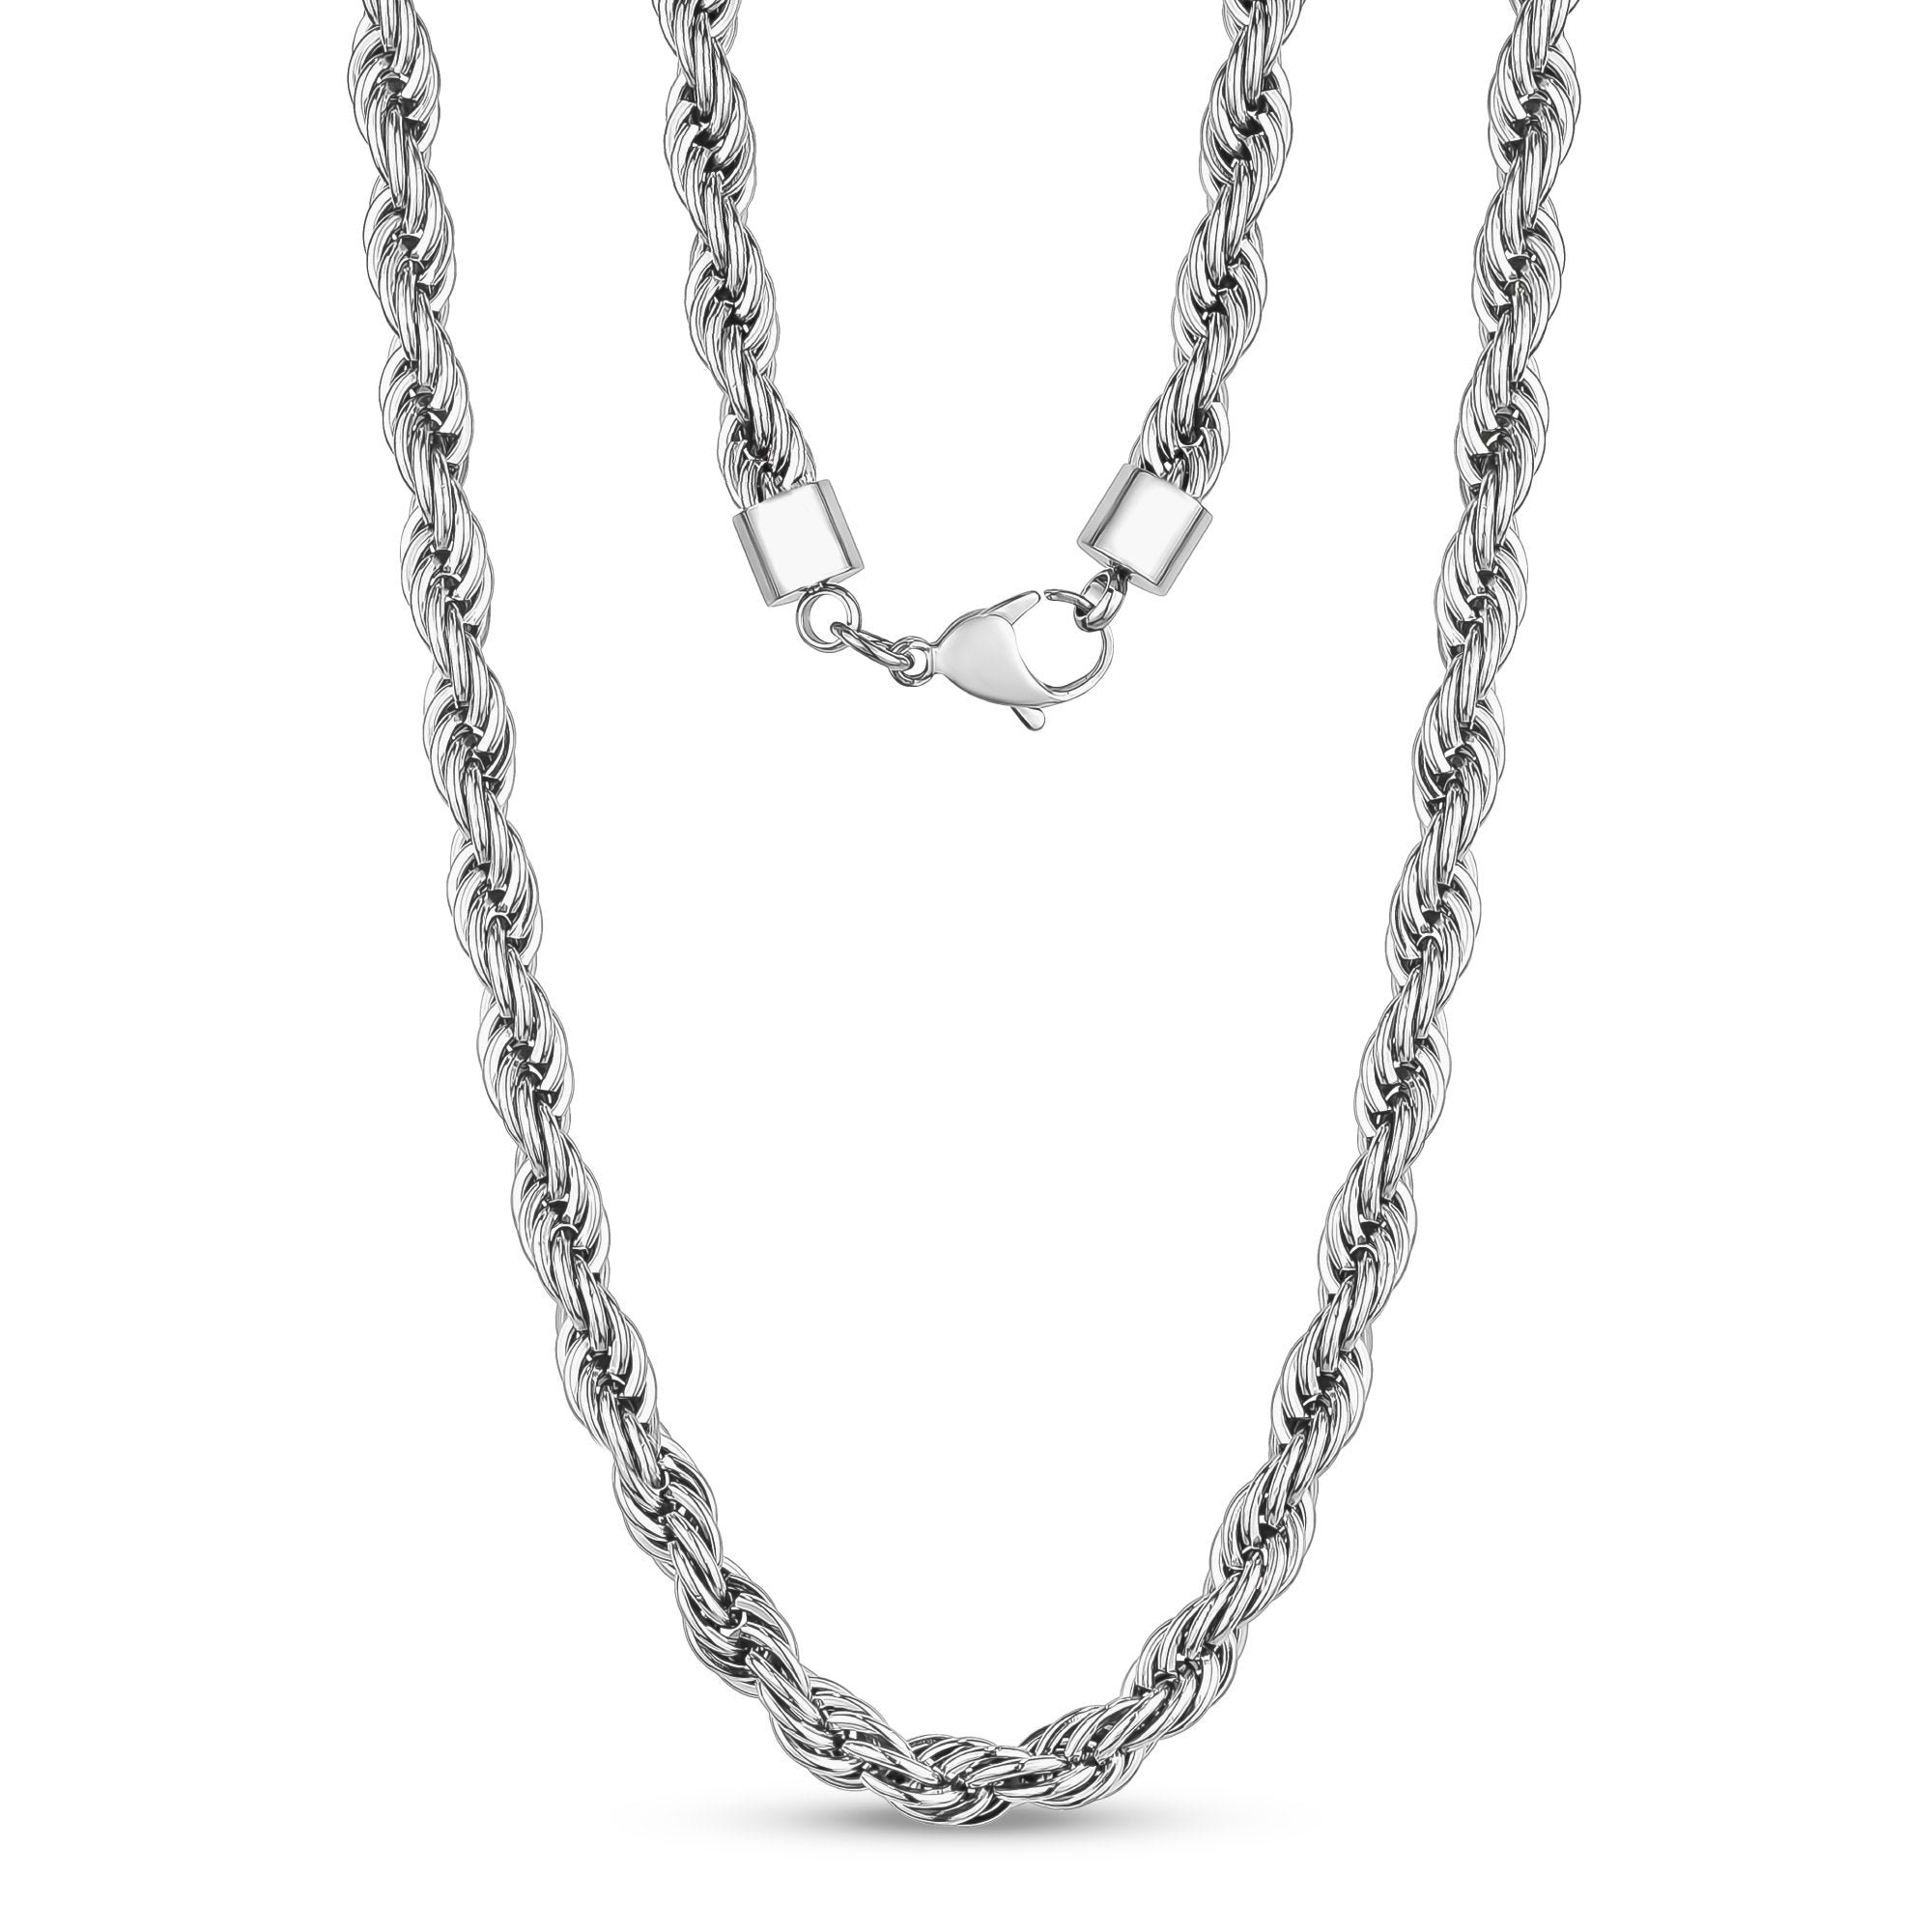 Never Fade 3.5mm-7mm Stainless Steel Cuban Chain Necklace Men Link Curb  Chain Gift Jewelry | Amazon.com